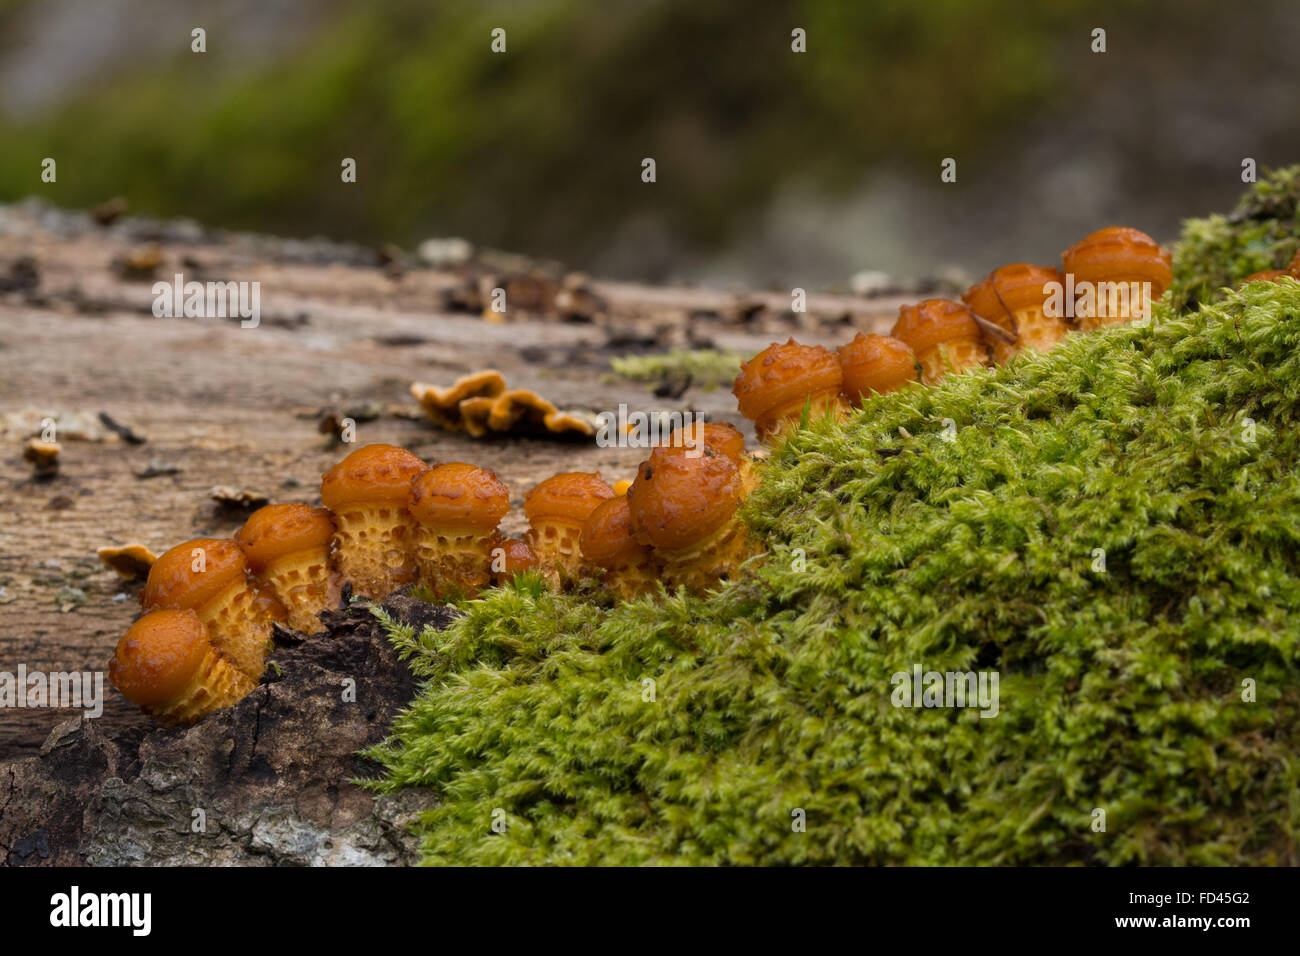 Row of toadstools on oak tree stump in New Forest, Hampshire, England Stock Photo